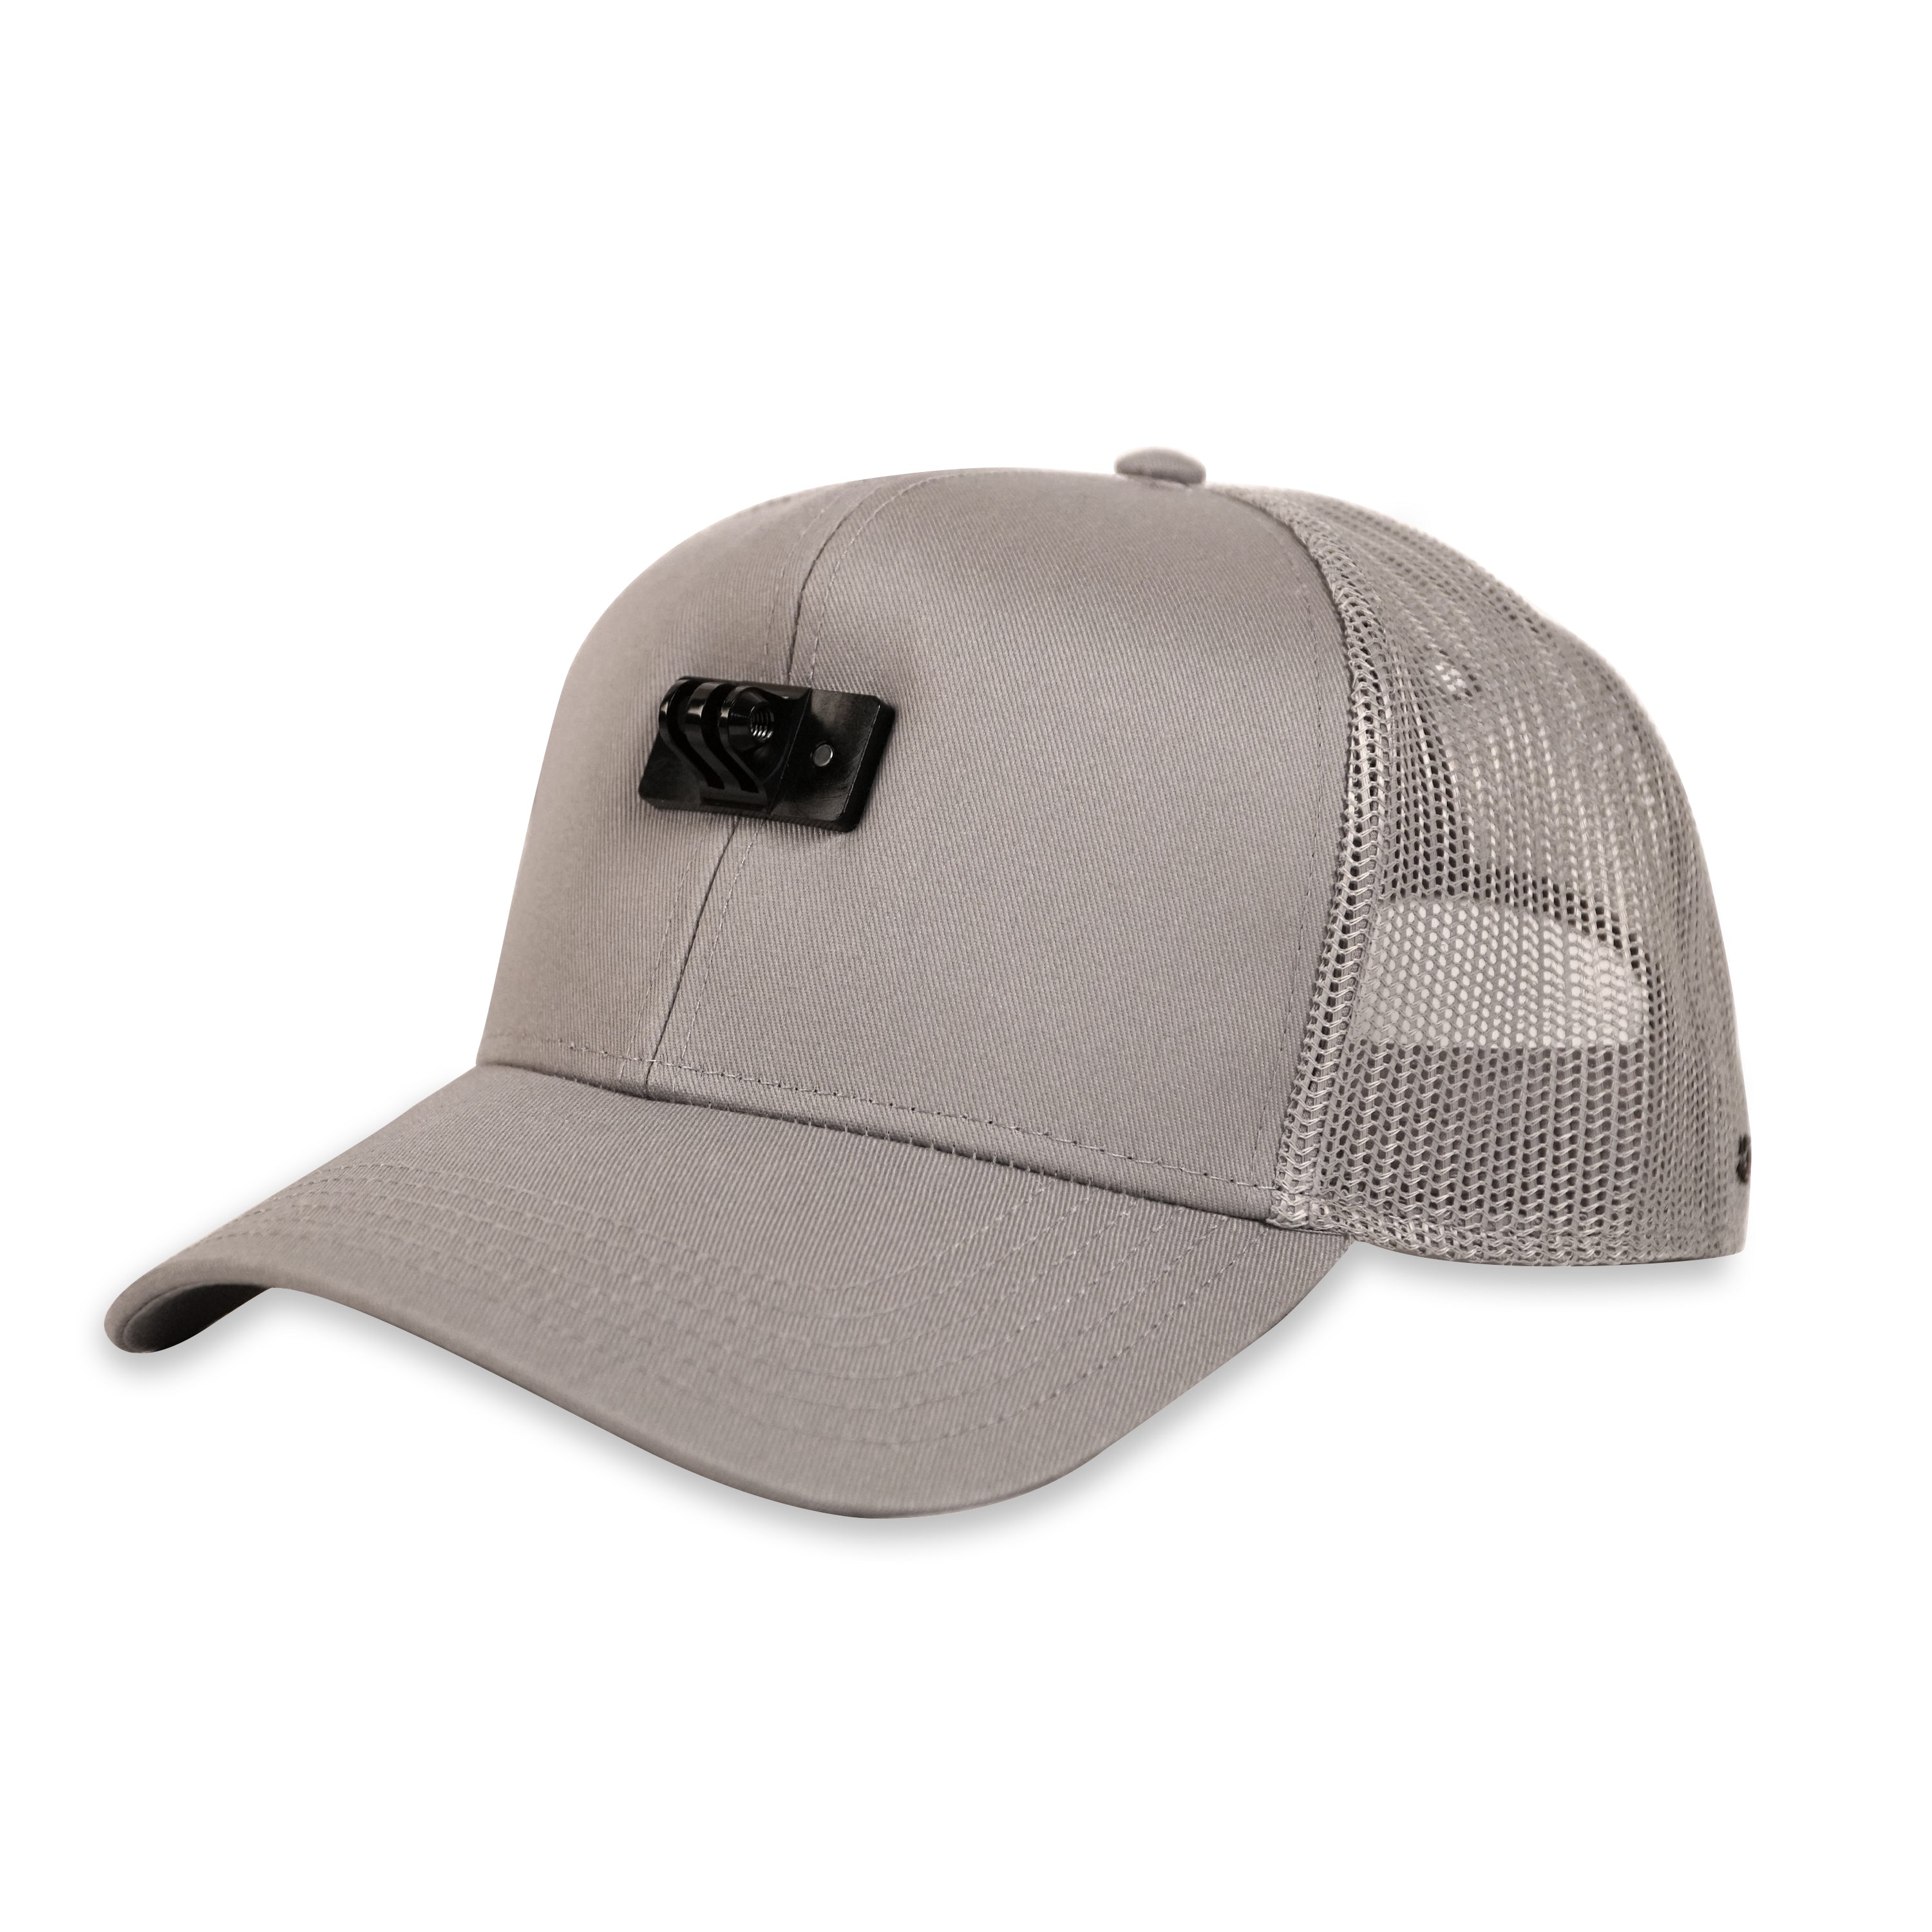 ActionHat Mesh: Gray Curved Bill